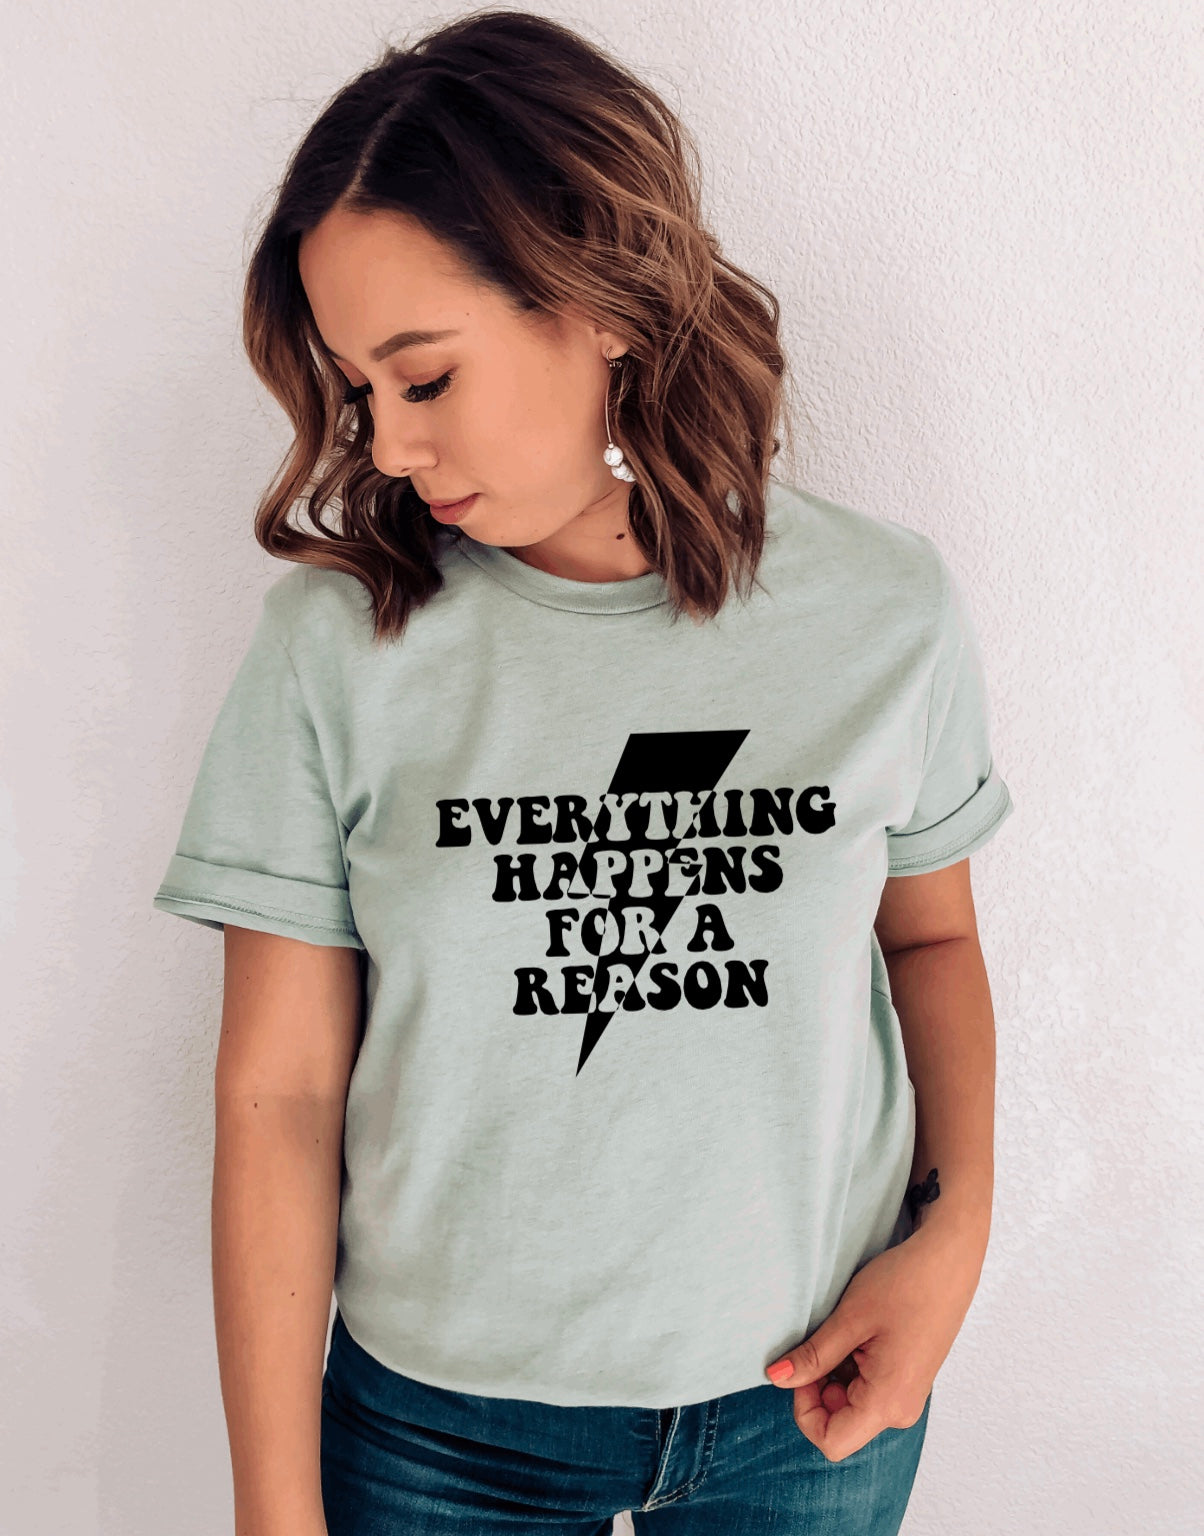 Everything Happens for a Reason- Retro lightening t-shirt